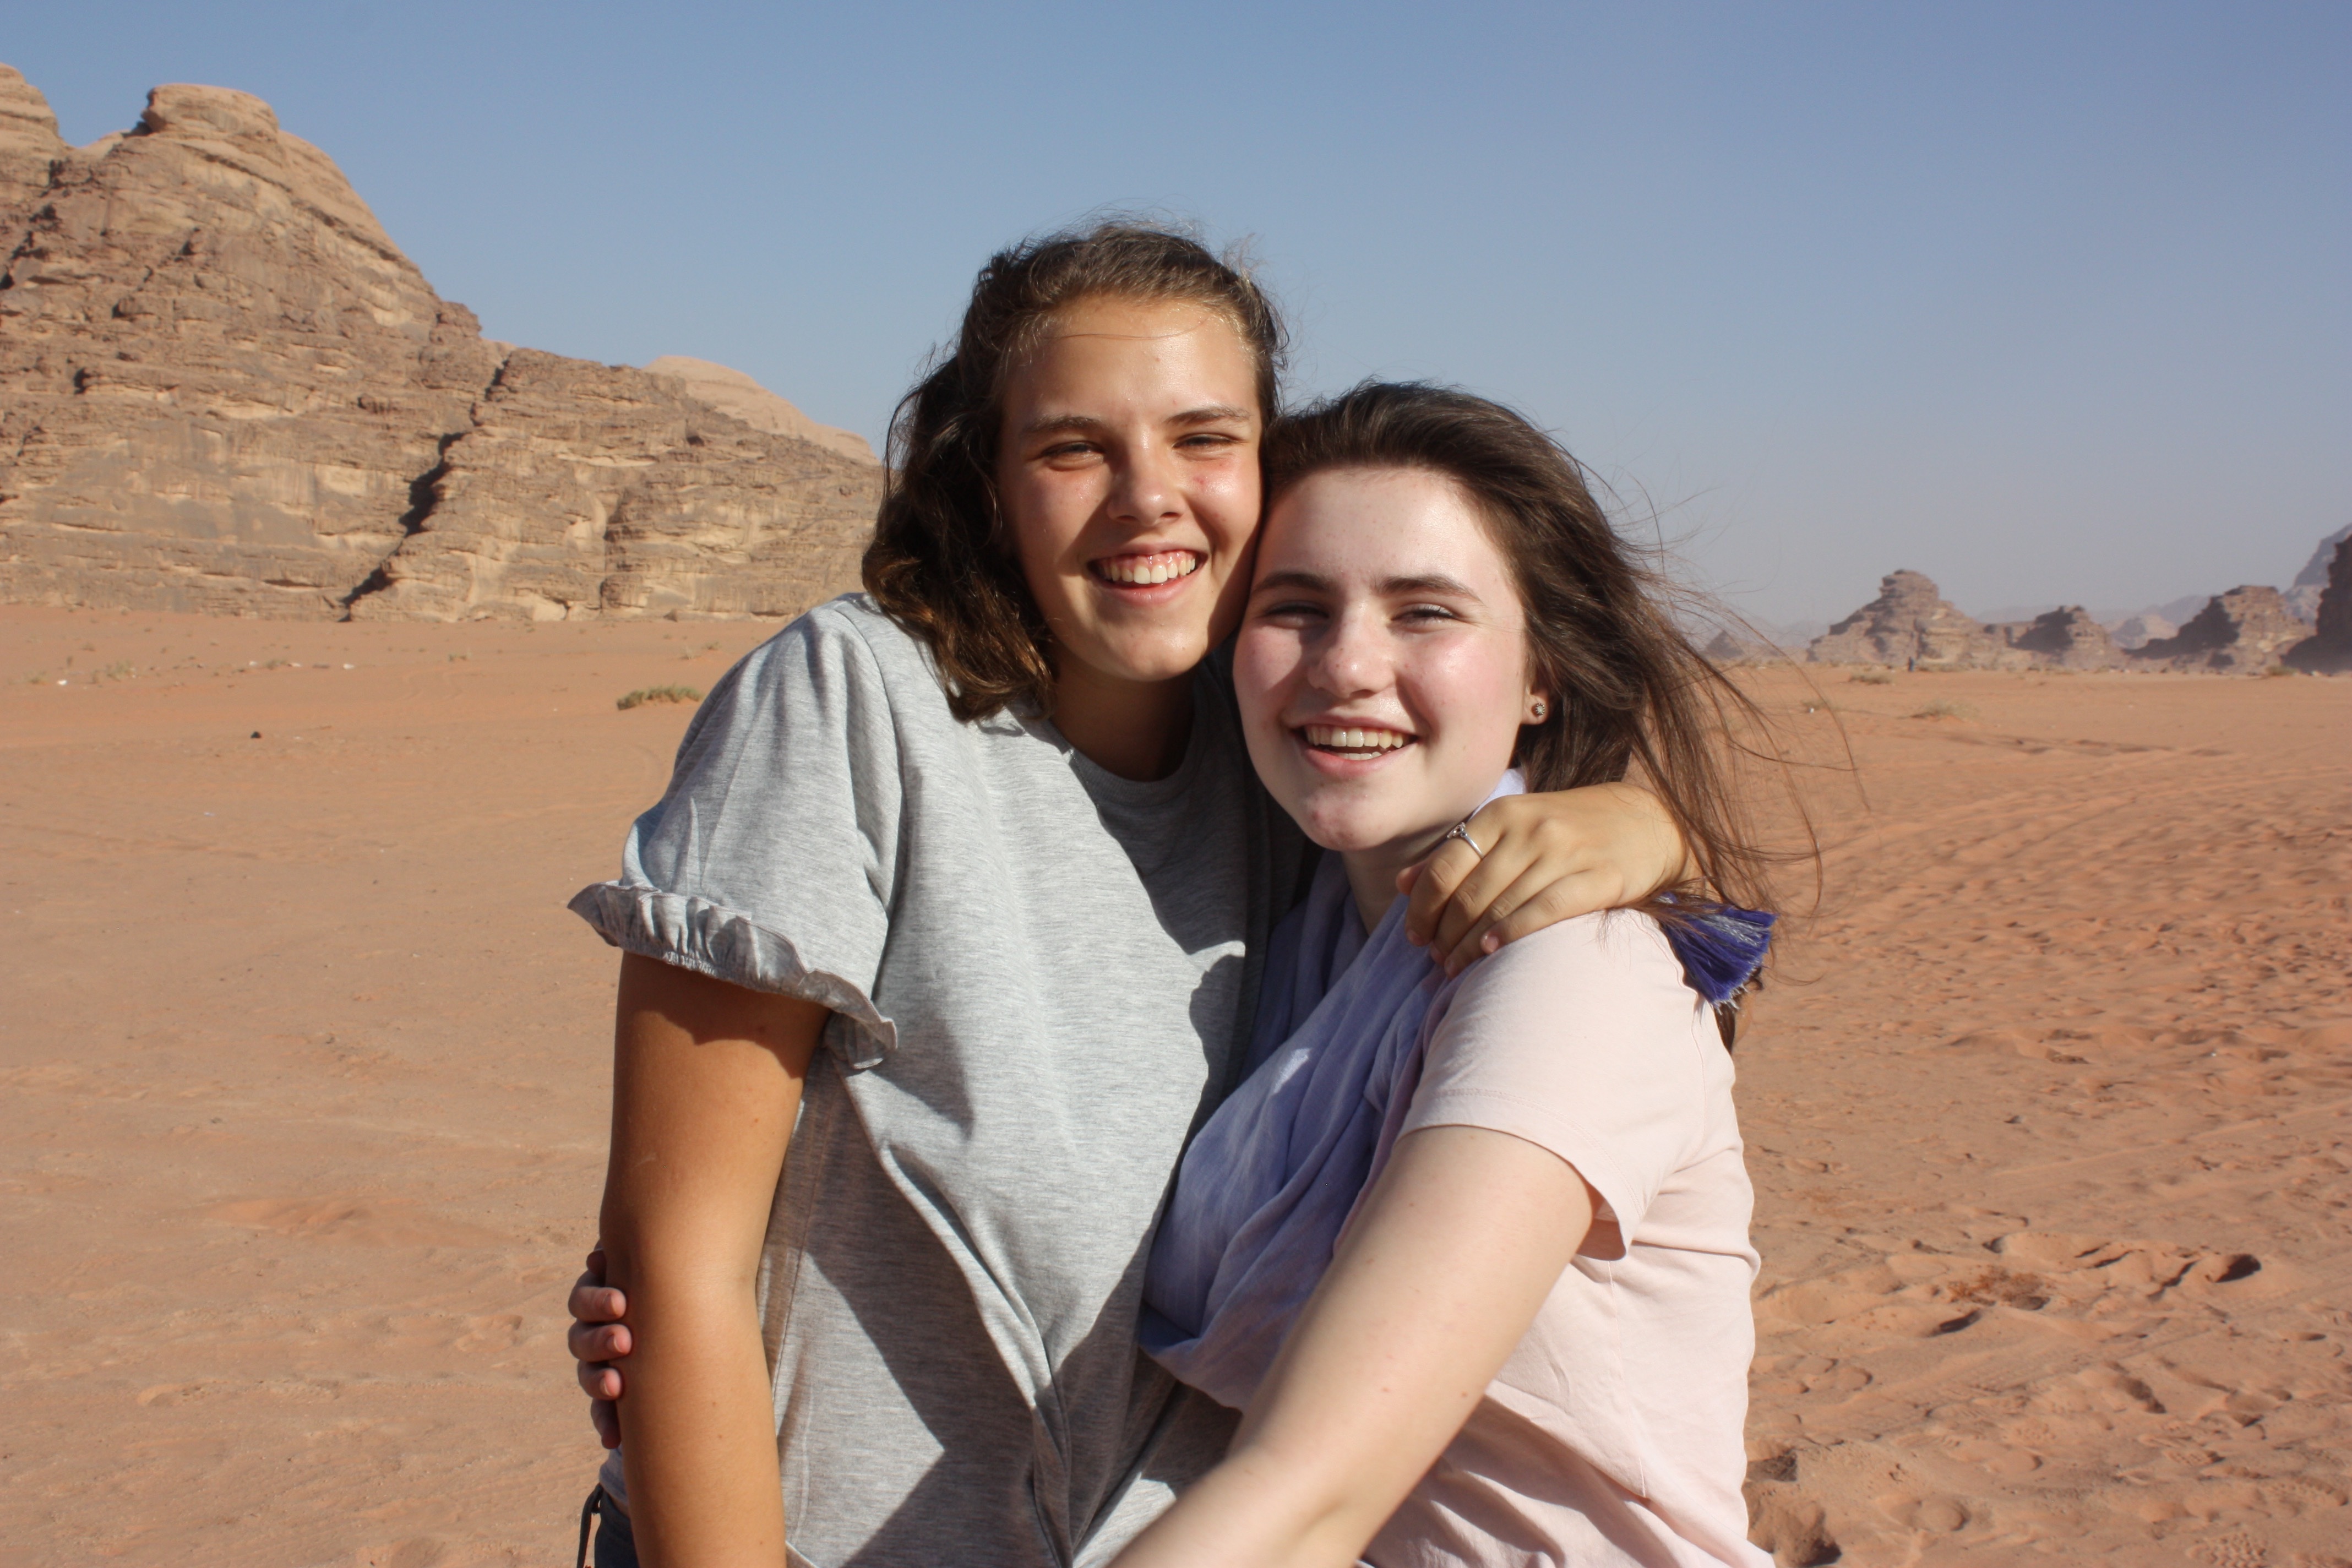 Phoebe and a friend hugging and smiling in the desert